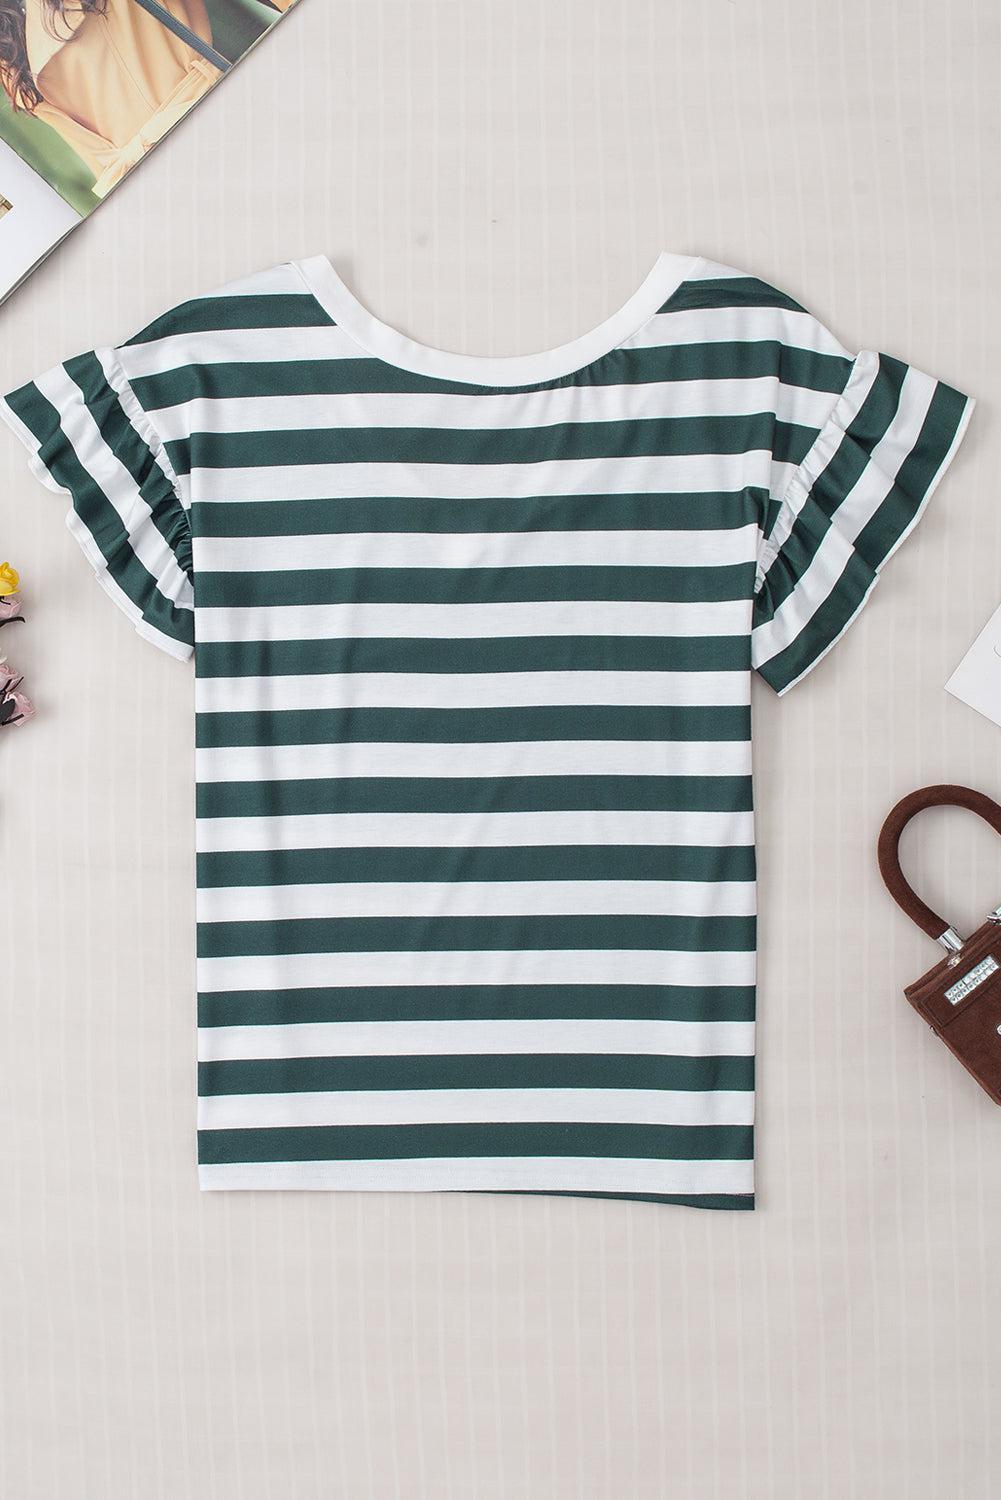 a green and white striped shirt next to a pair of scissors